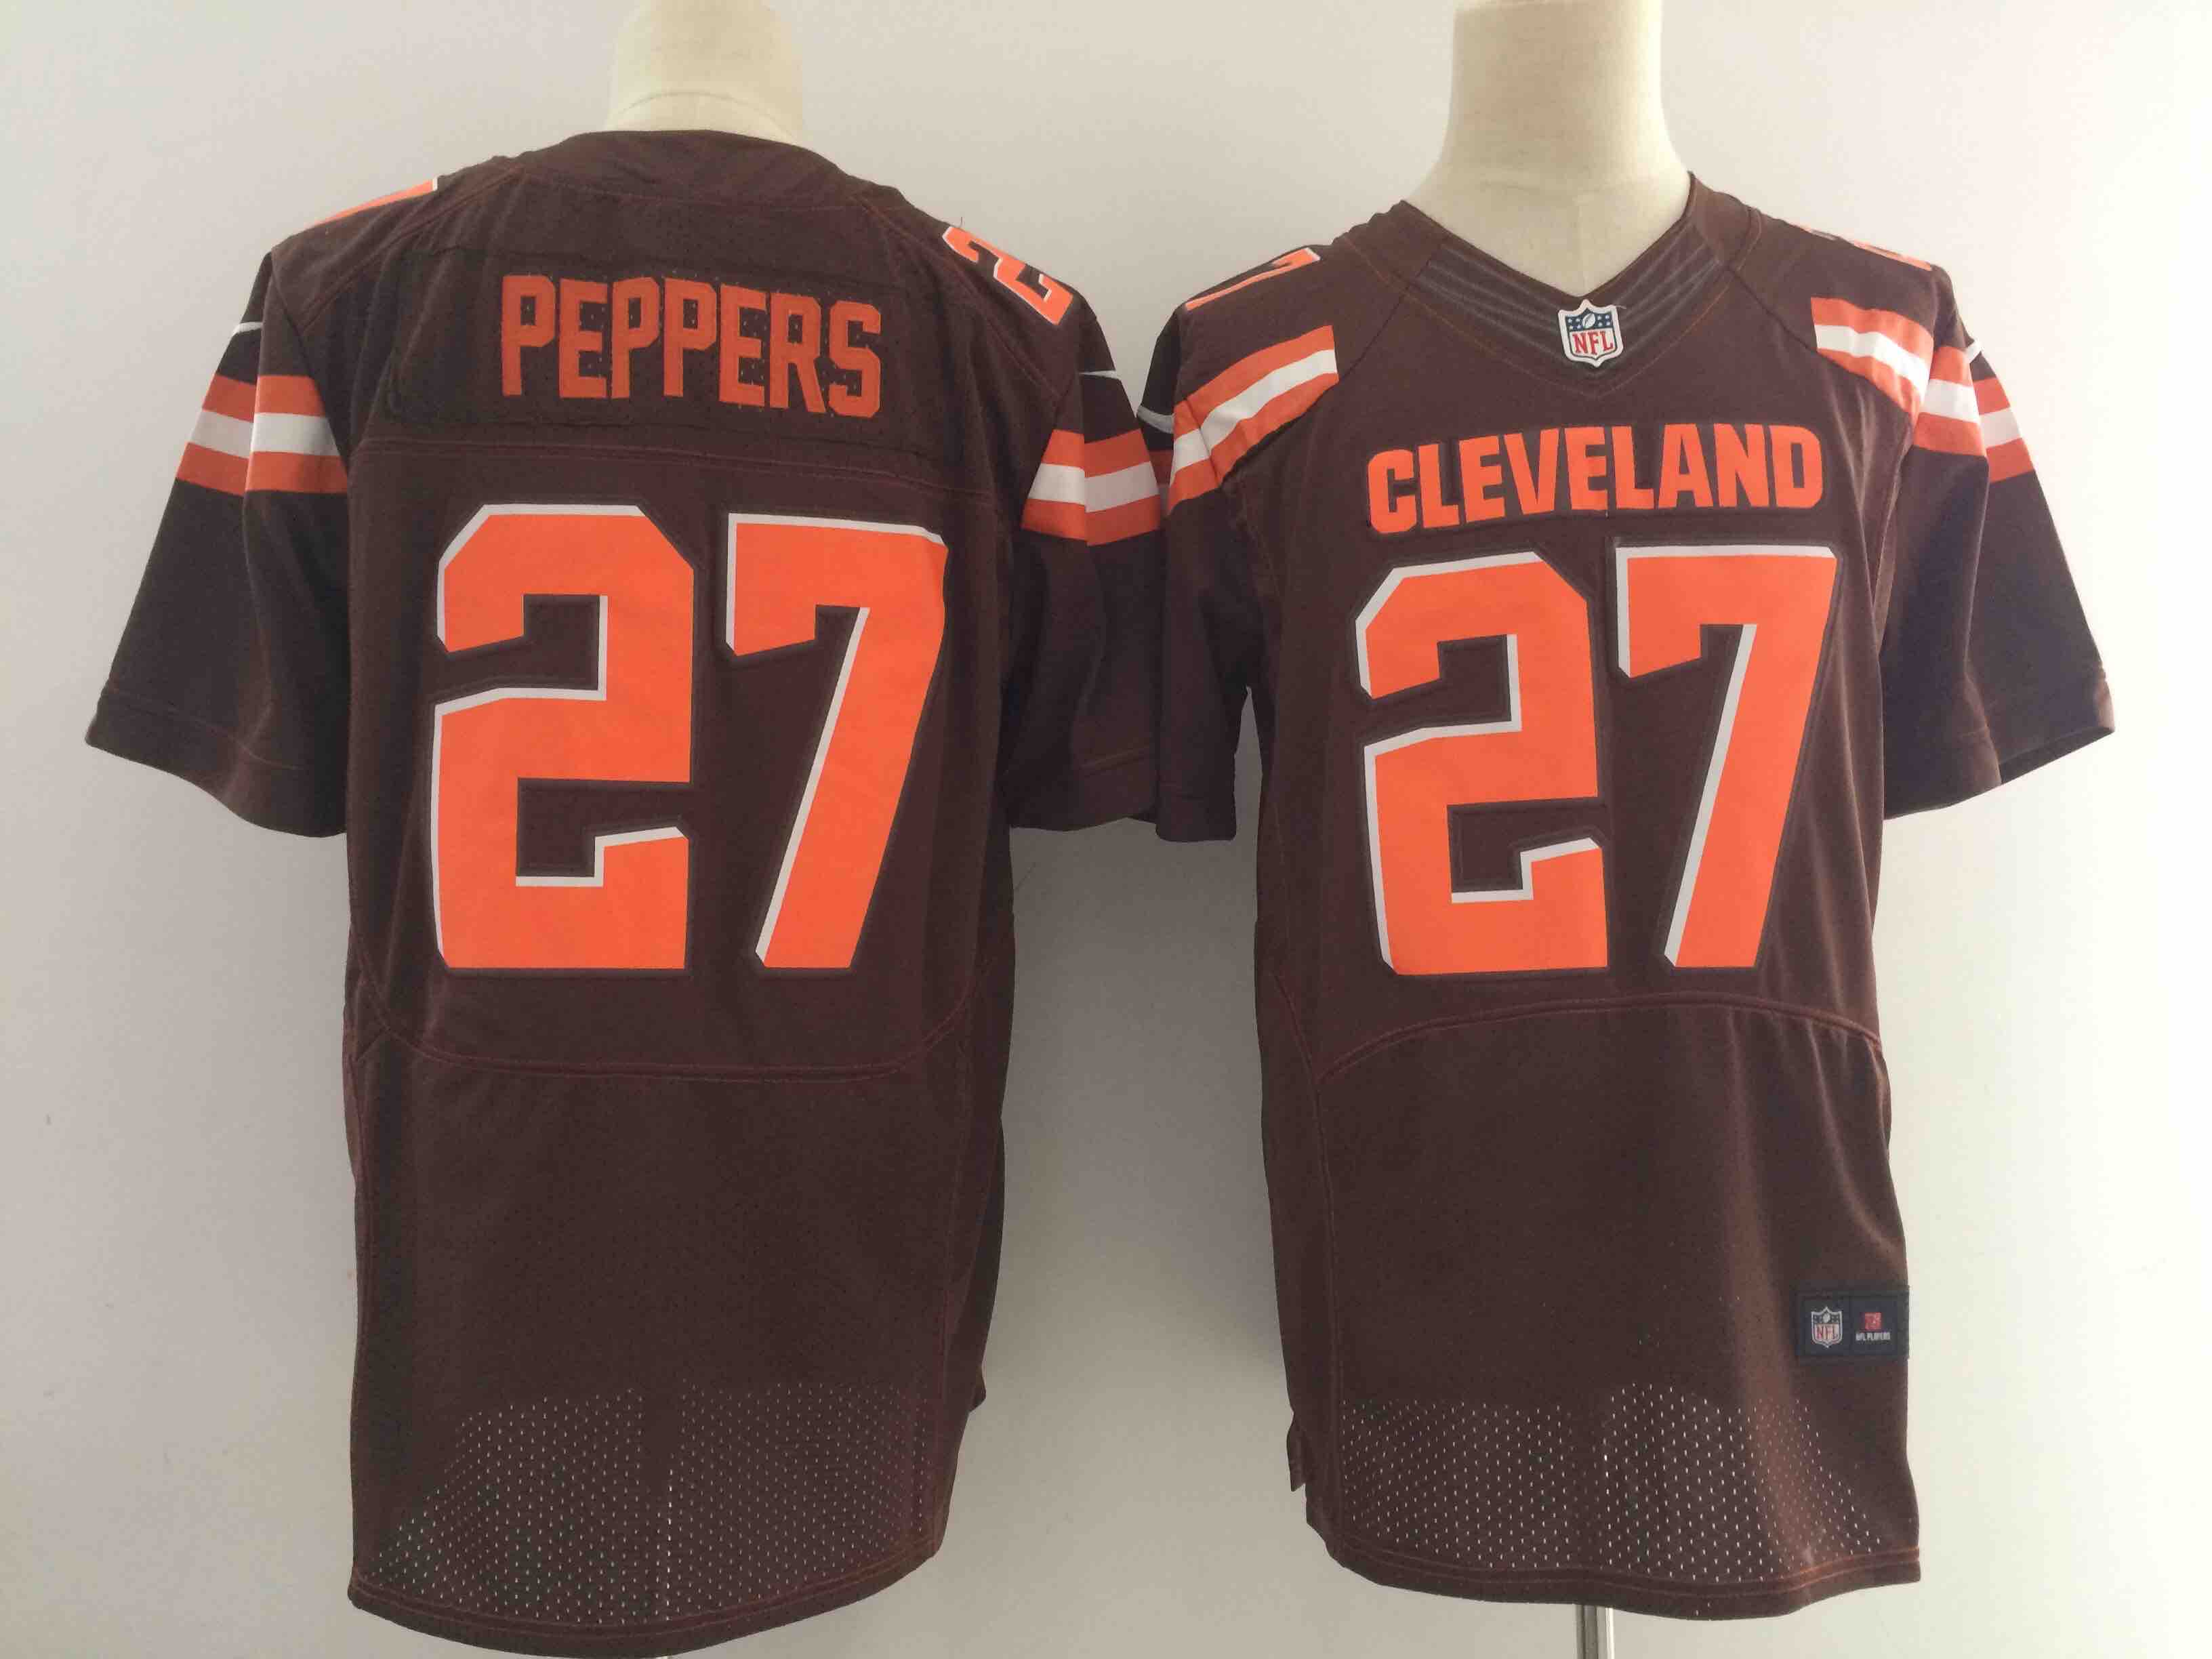 NFL Cleveland Browns #27 Peppers Brown Elite Jersey  